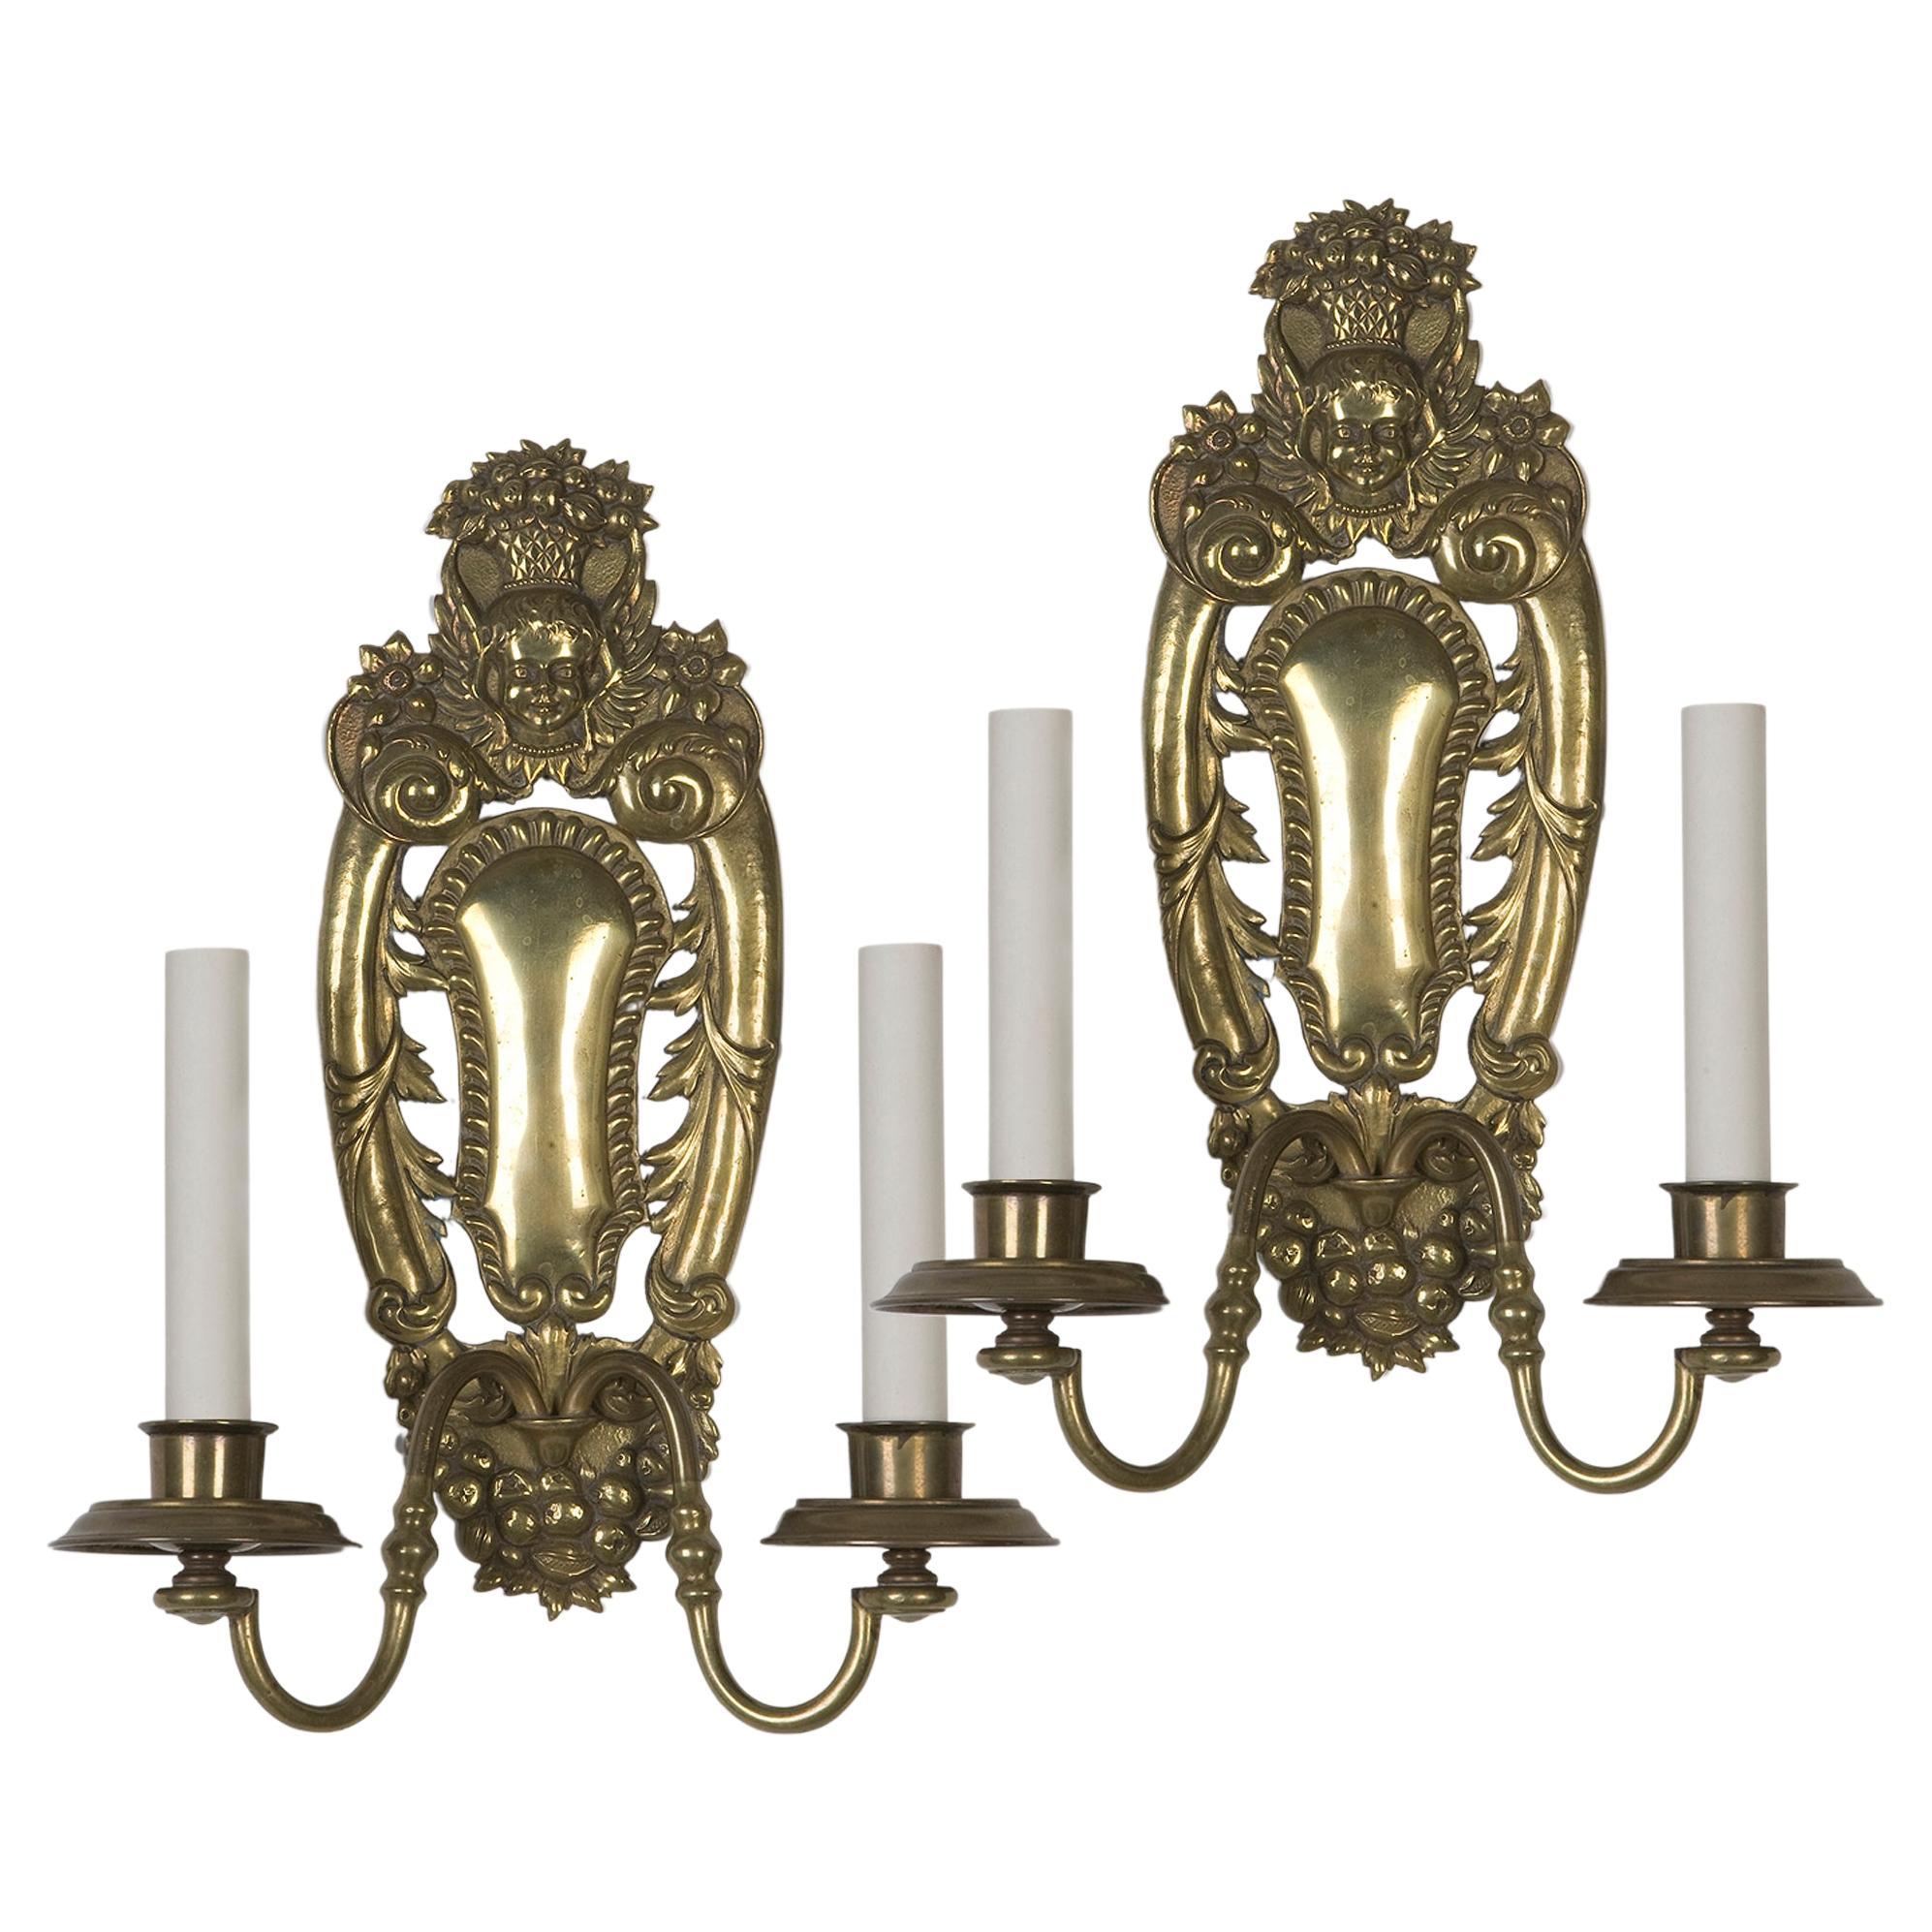 Two Arm Brass E. F. Caldwell Sconces with a Fruit and Foliate Motif, Circa 1910s For Sale